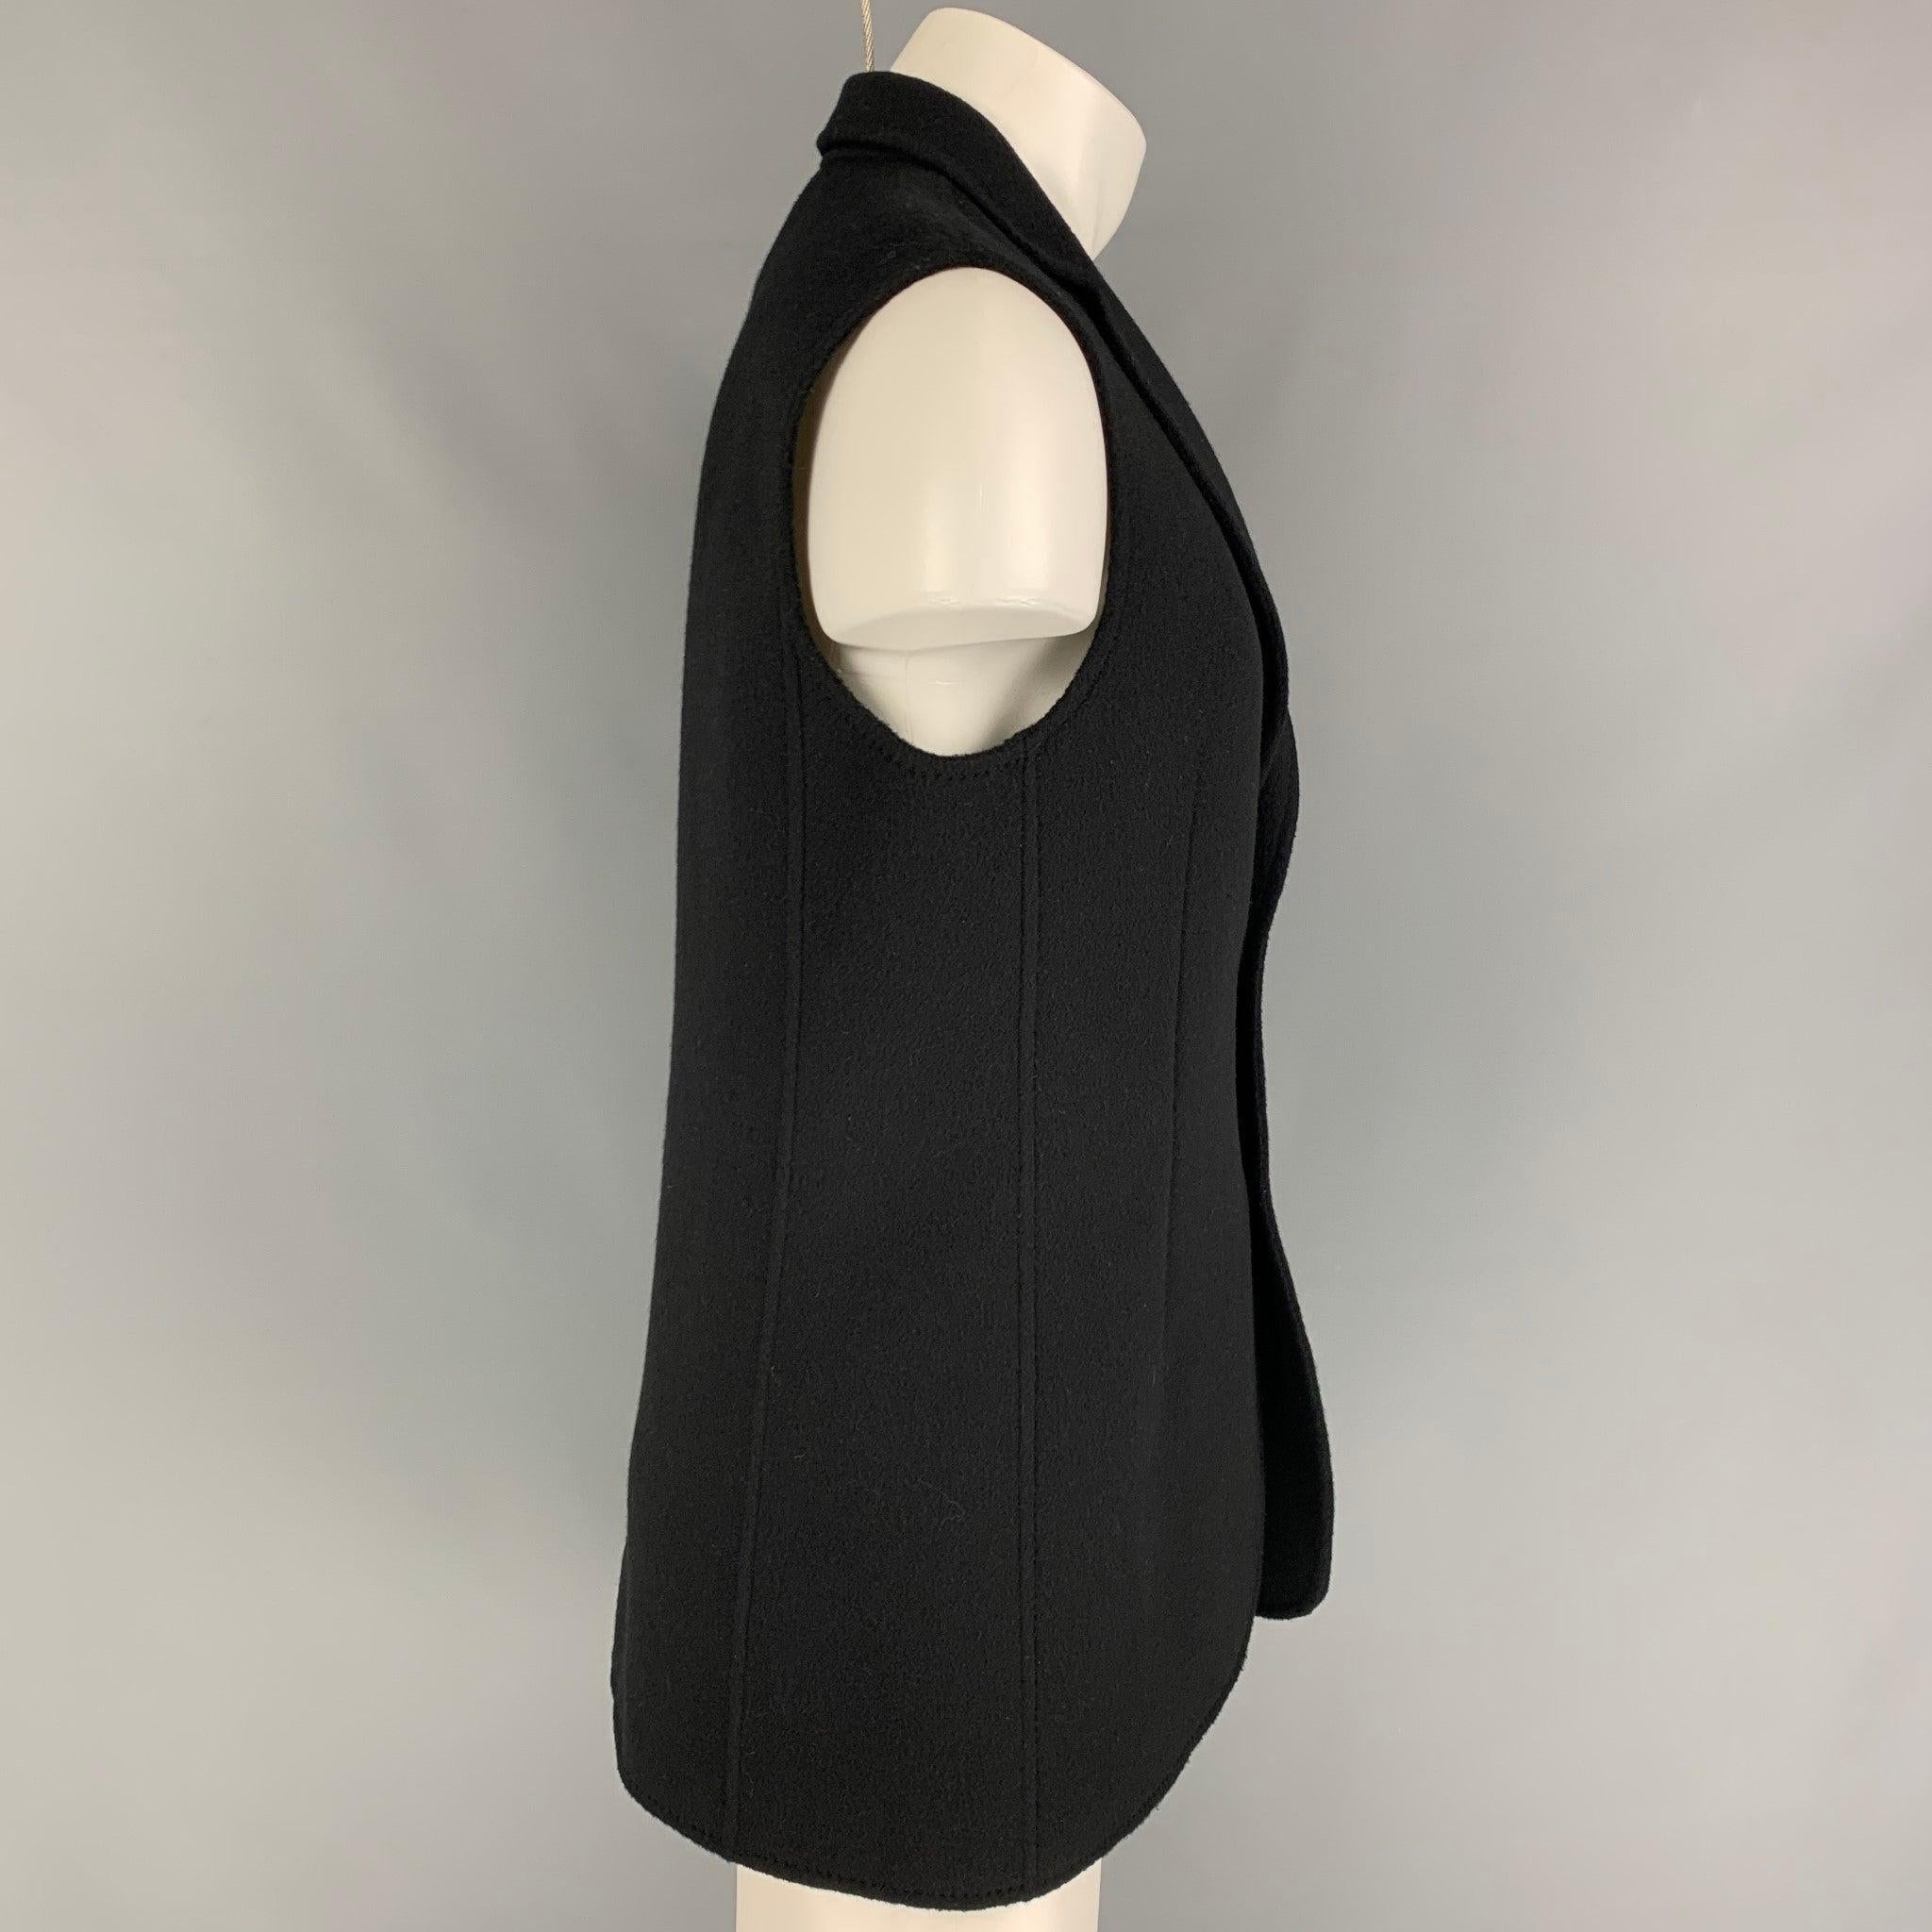 RAF SIMONS vest comes in a virgin wool featuring a notch lapel, patch pocket, and a double button closure. Made in Italy.
Excellent
Pre-Owned Condition. 

Marked:   50 

Measurements: 
 
Shoulder: 17 inches  Chest: 40 inches  Length: 29.5 inches 
 